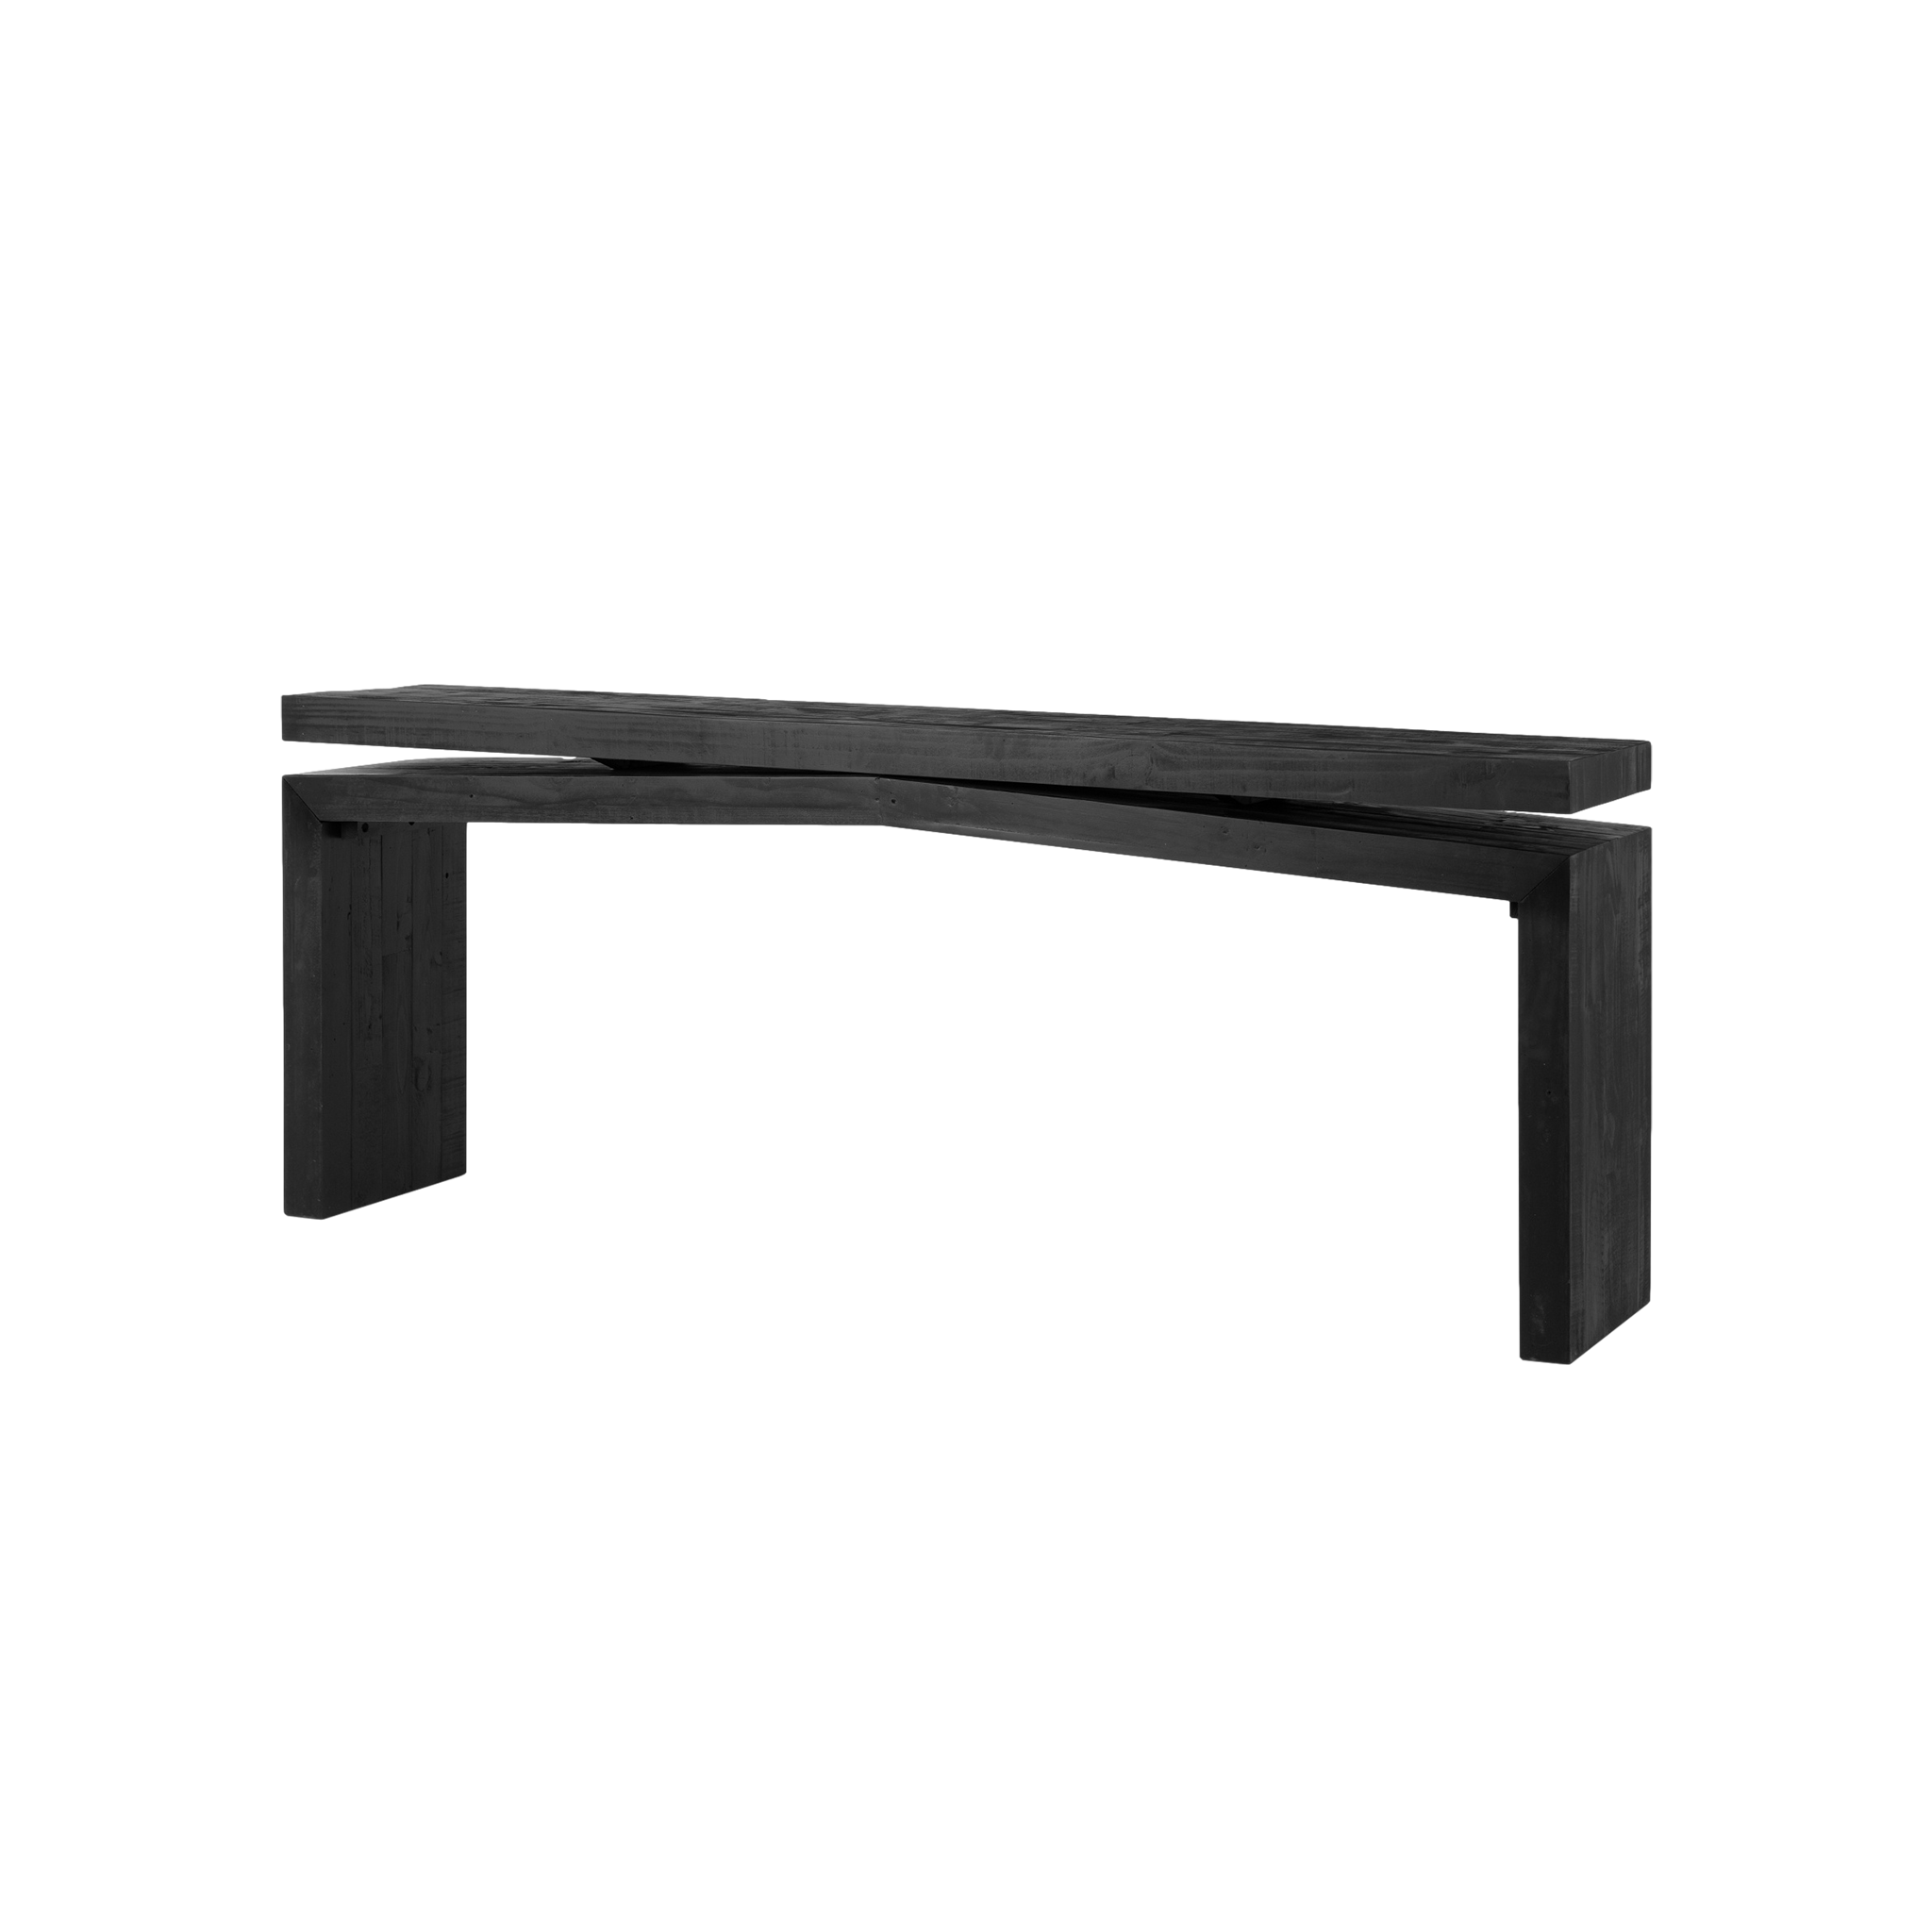 Matthes Console Table in Aged Black Pine